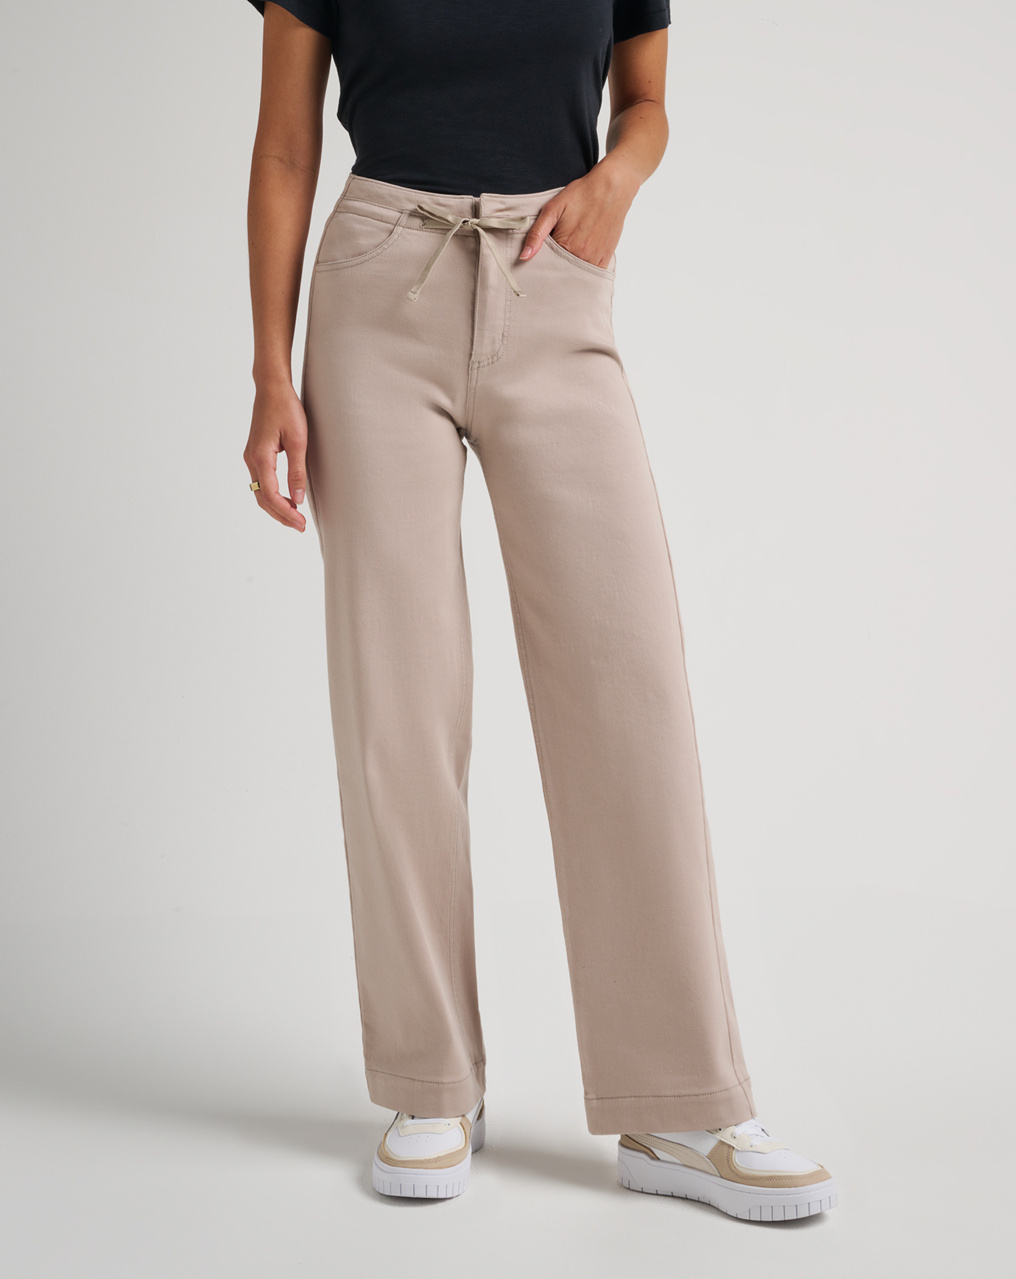 Trending High Waisted Pants/Trousers; 20+ Ways to Rock it